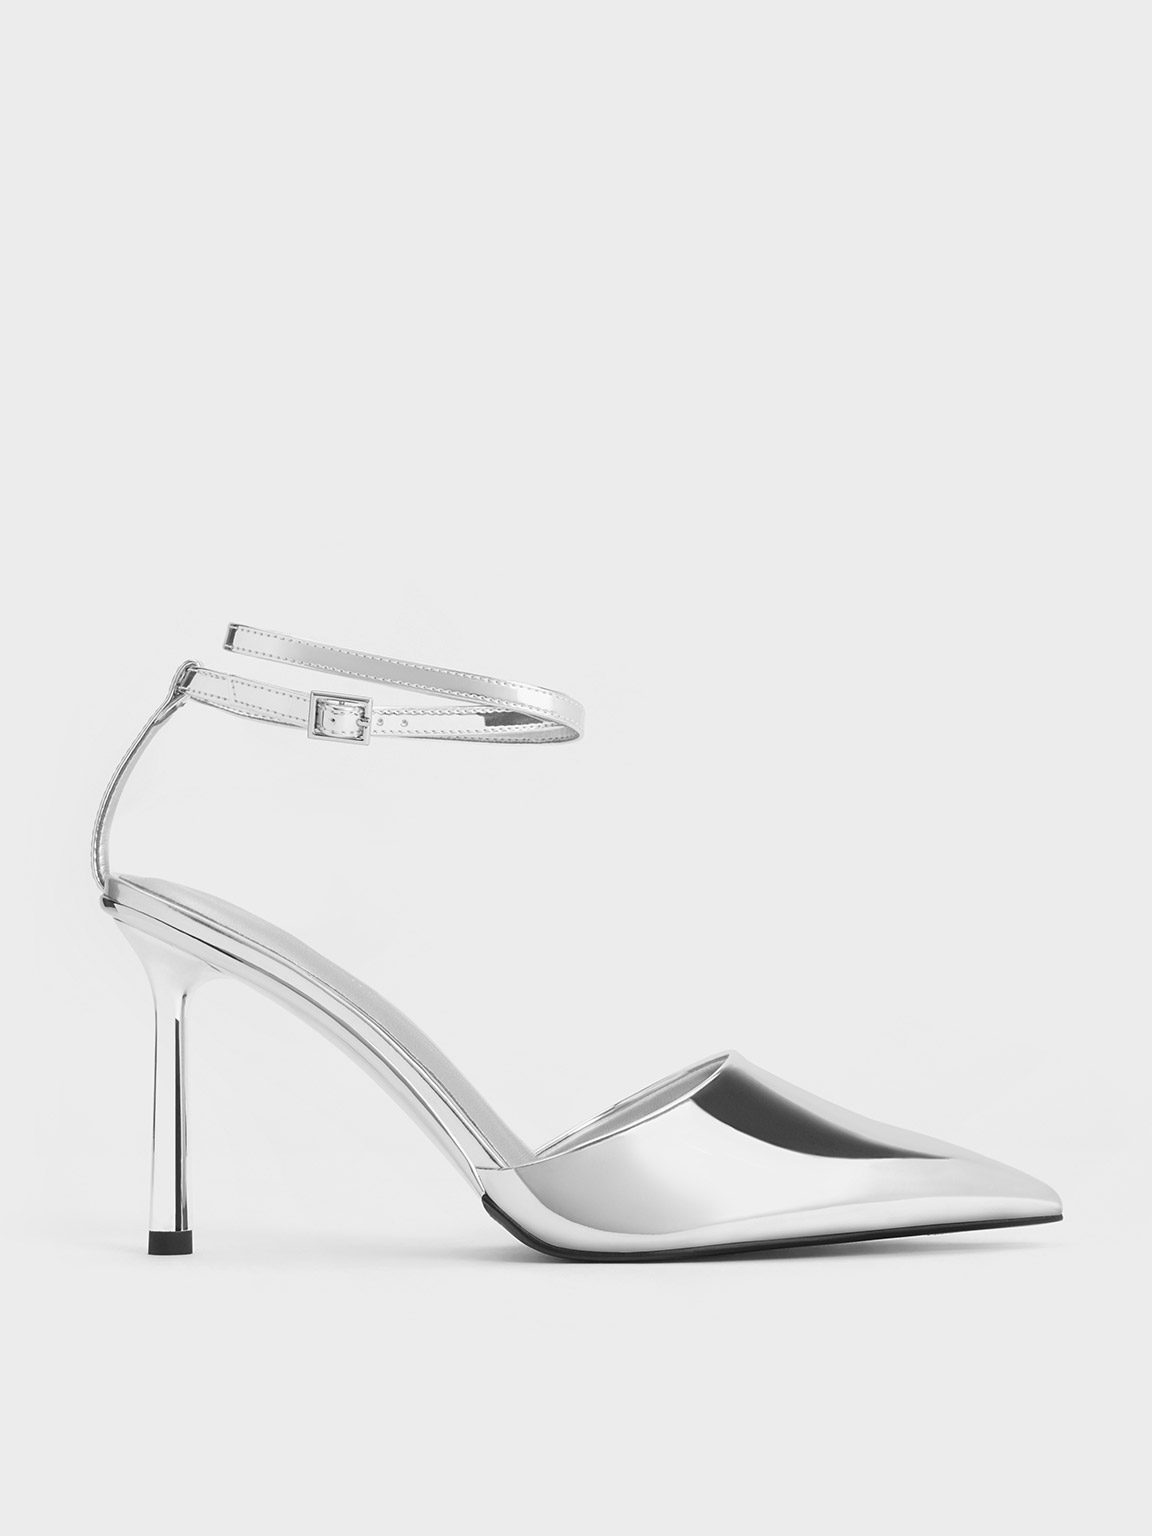 Silver Metallic Patent Pointed-Toe Ankle-Strap Pumps | CHARLES & KEITH